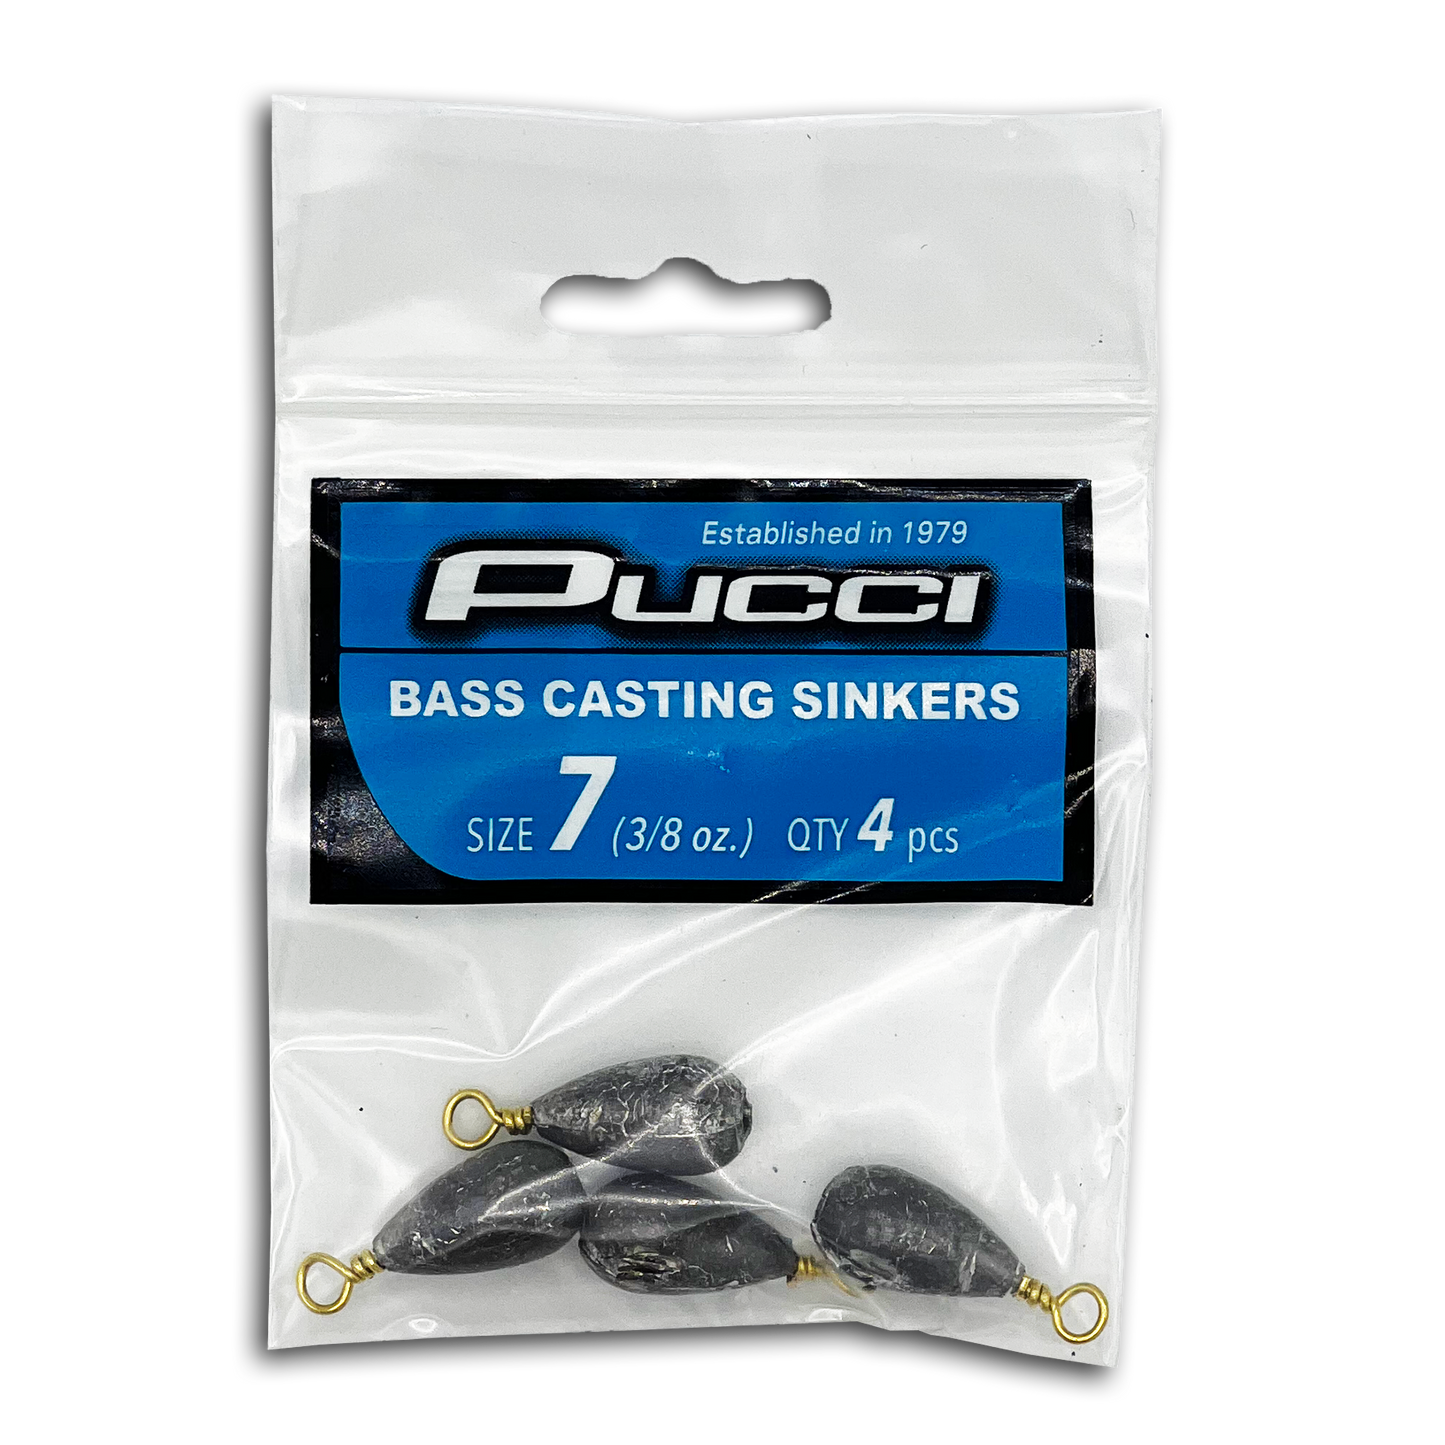 BASS CASTING SINKERS